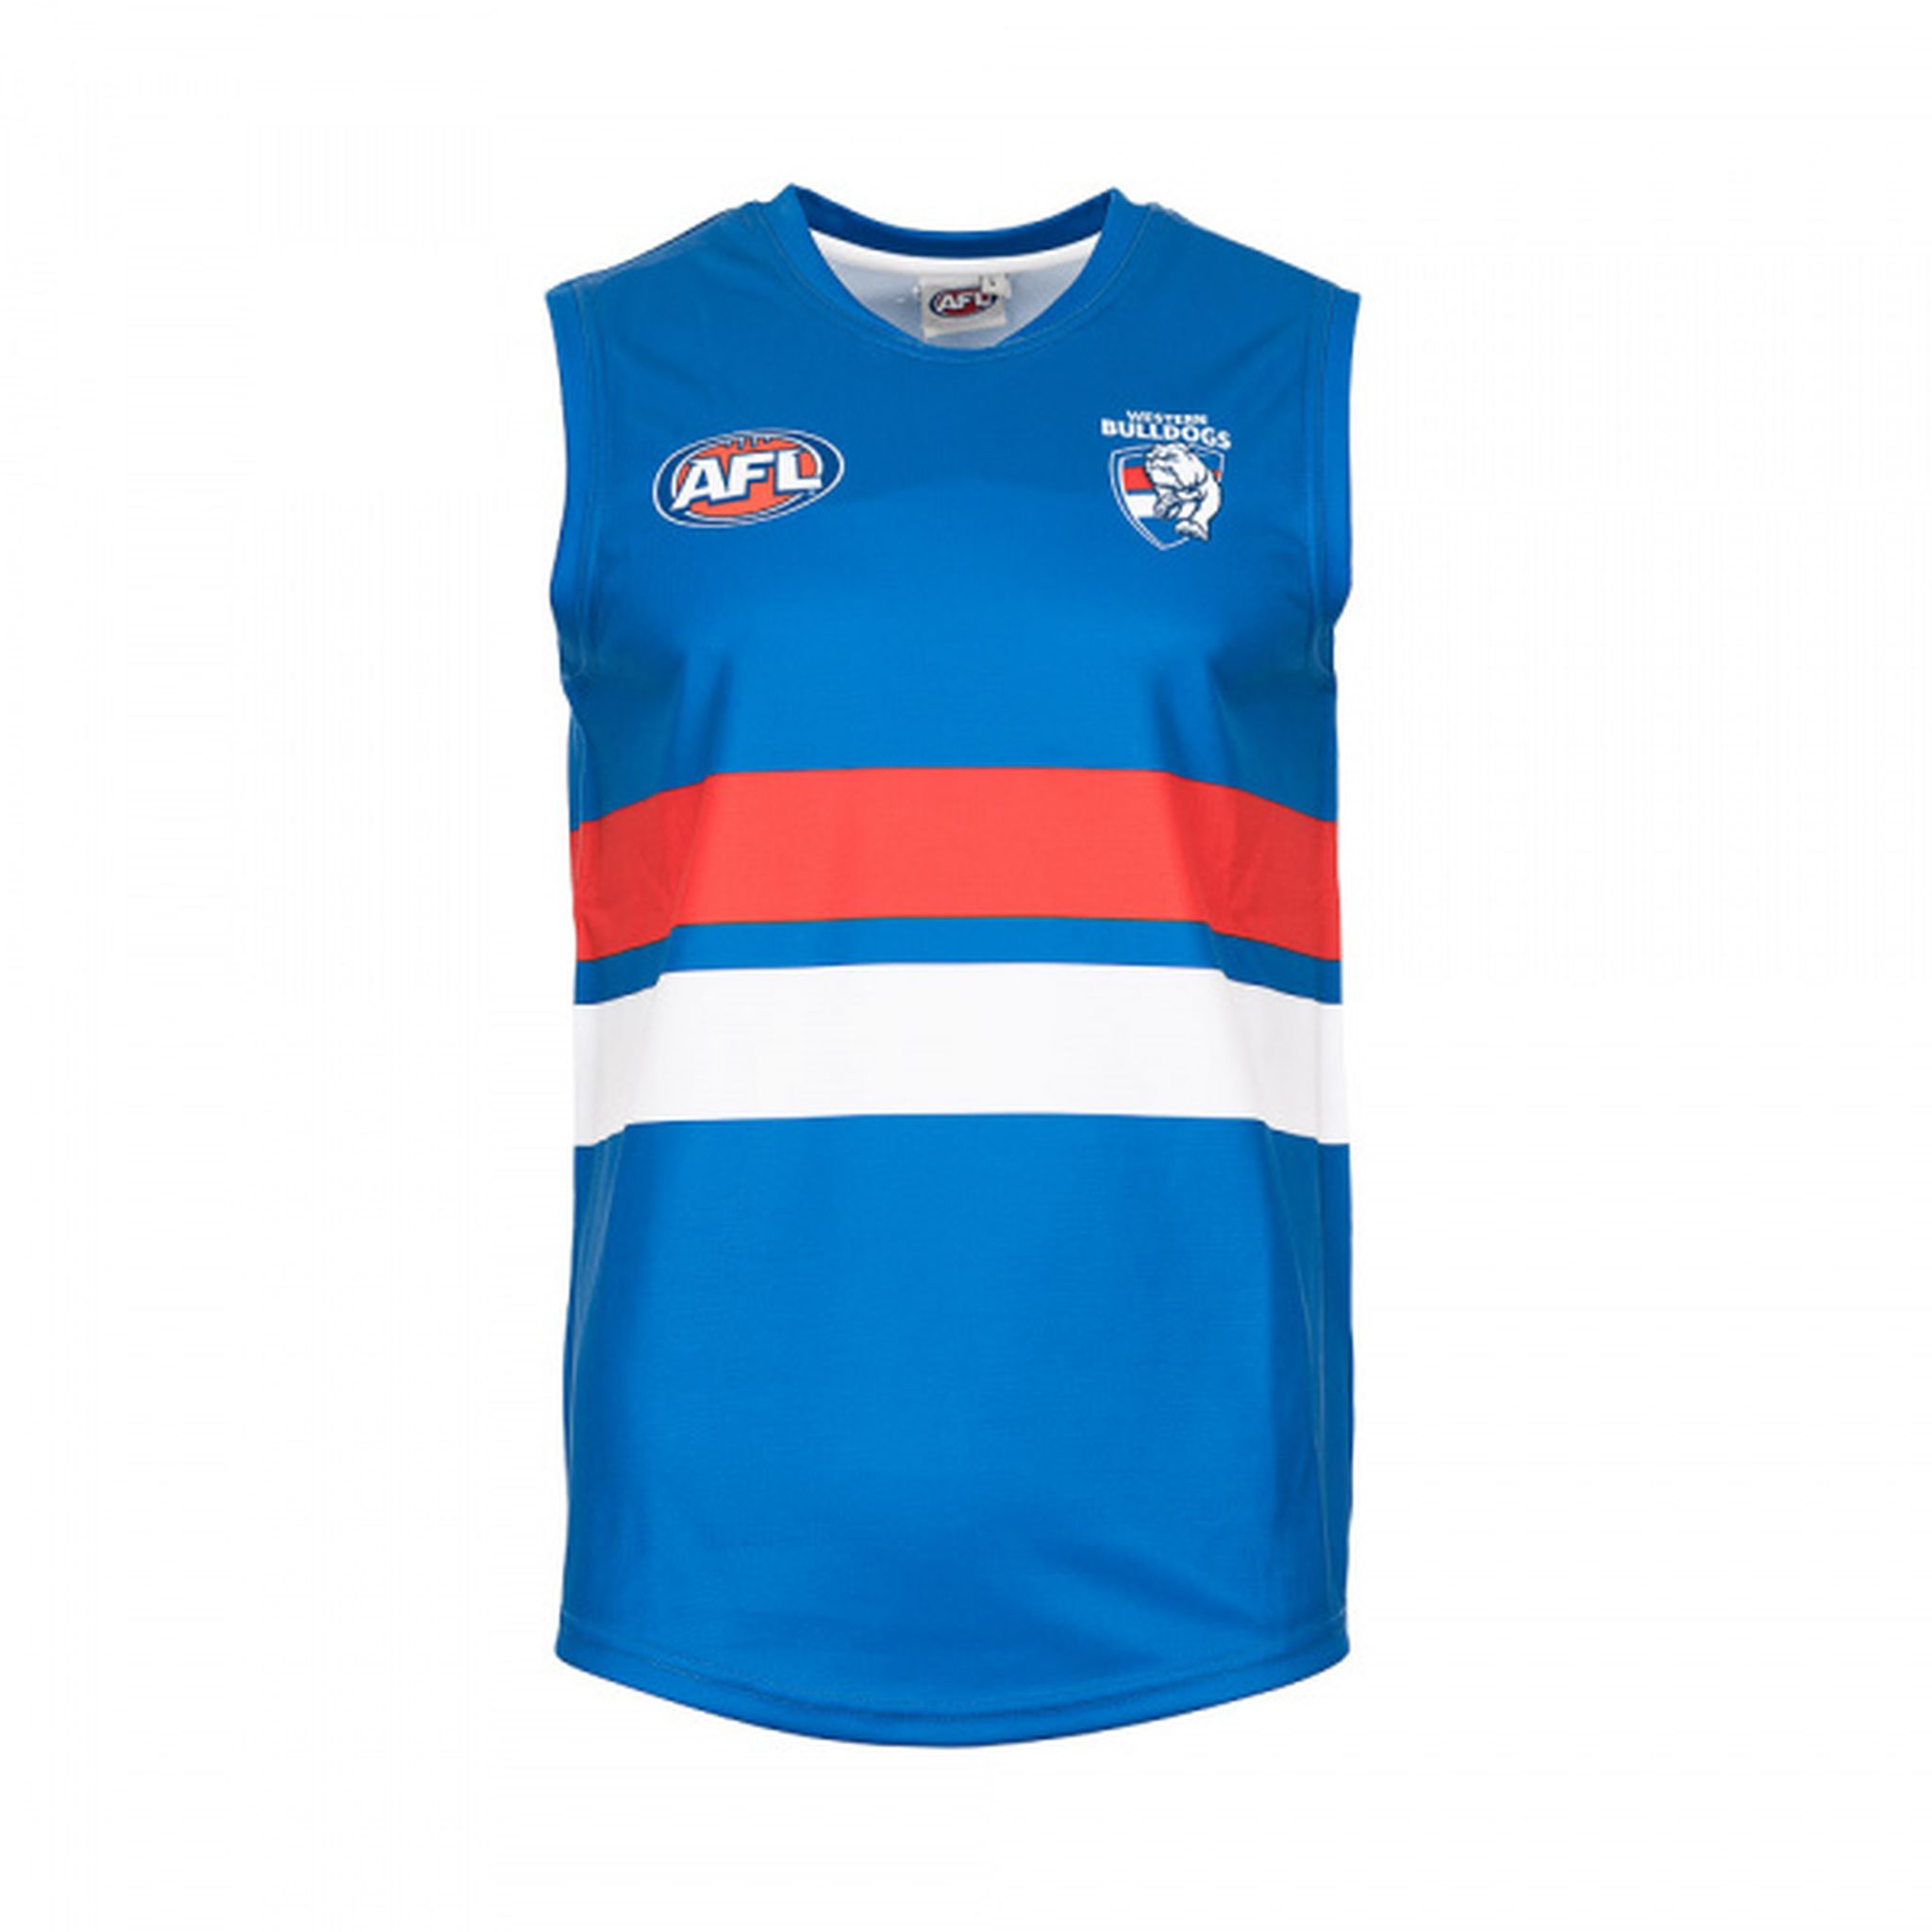 Burley Western Bulldogs AFL Home Adults Replica Guernsey